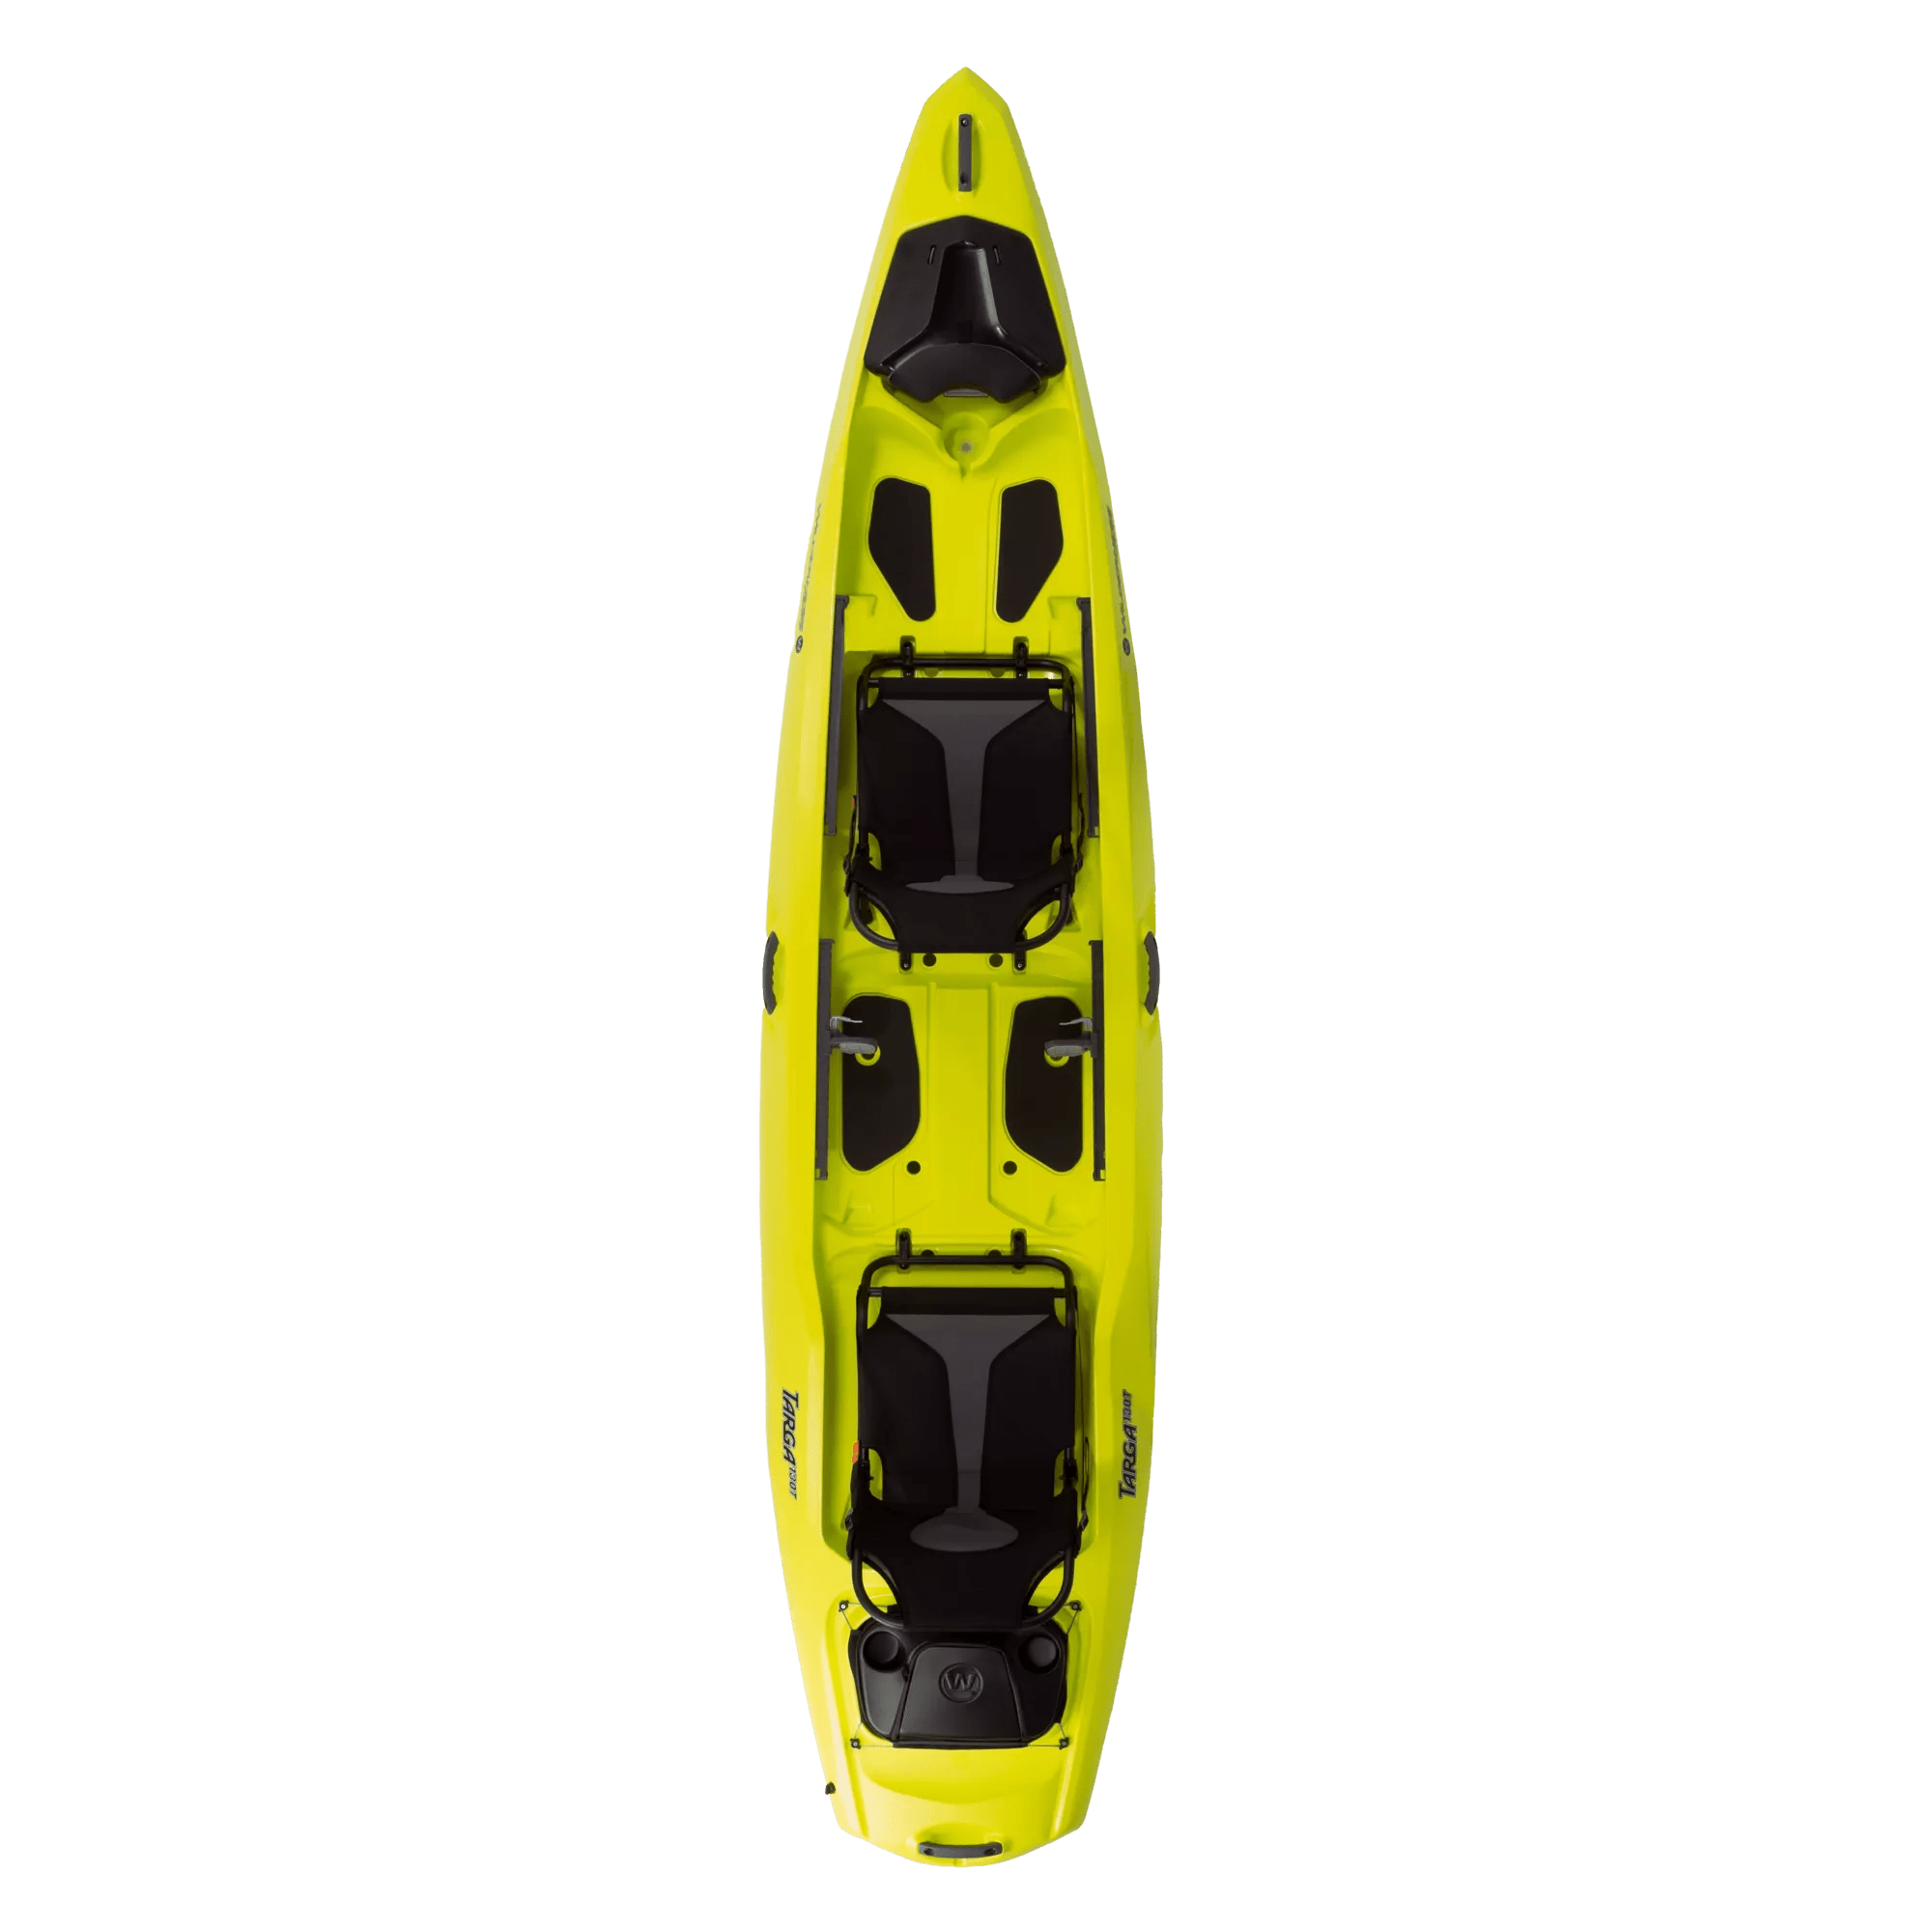 WILDERNESS SYSTEMS - Targa 130T Recreational Kayak - Discontinued color/model - Yellow - 9751133180 - TOP 